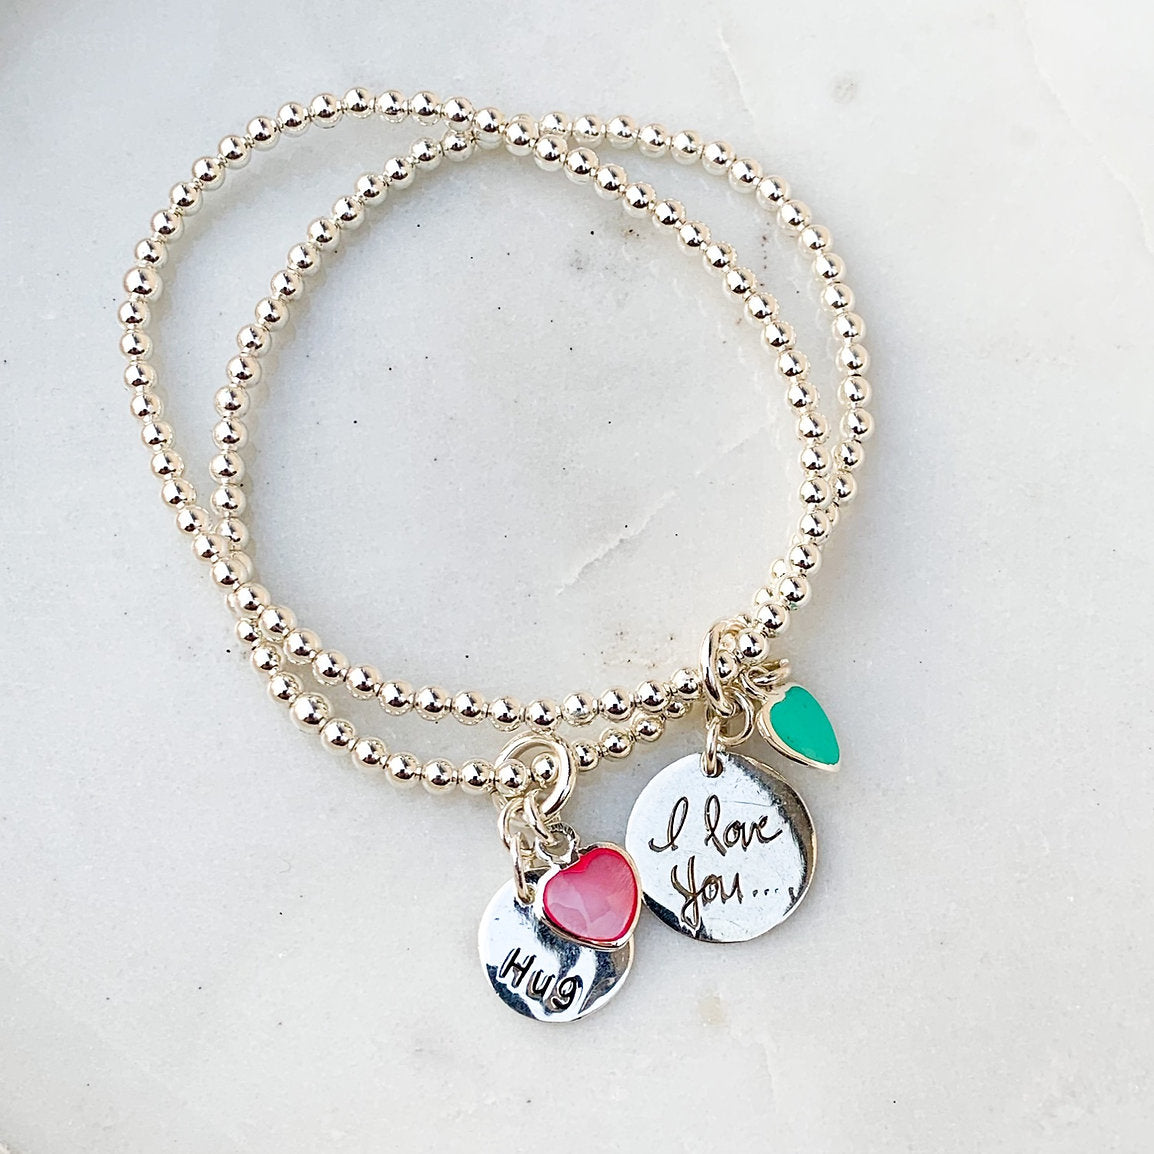 Love is in the Air Bracelets